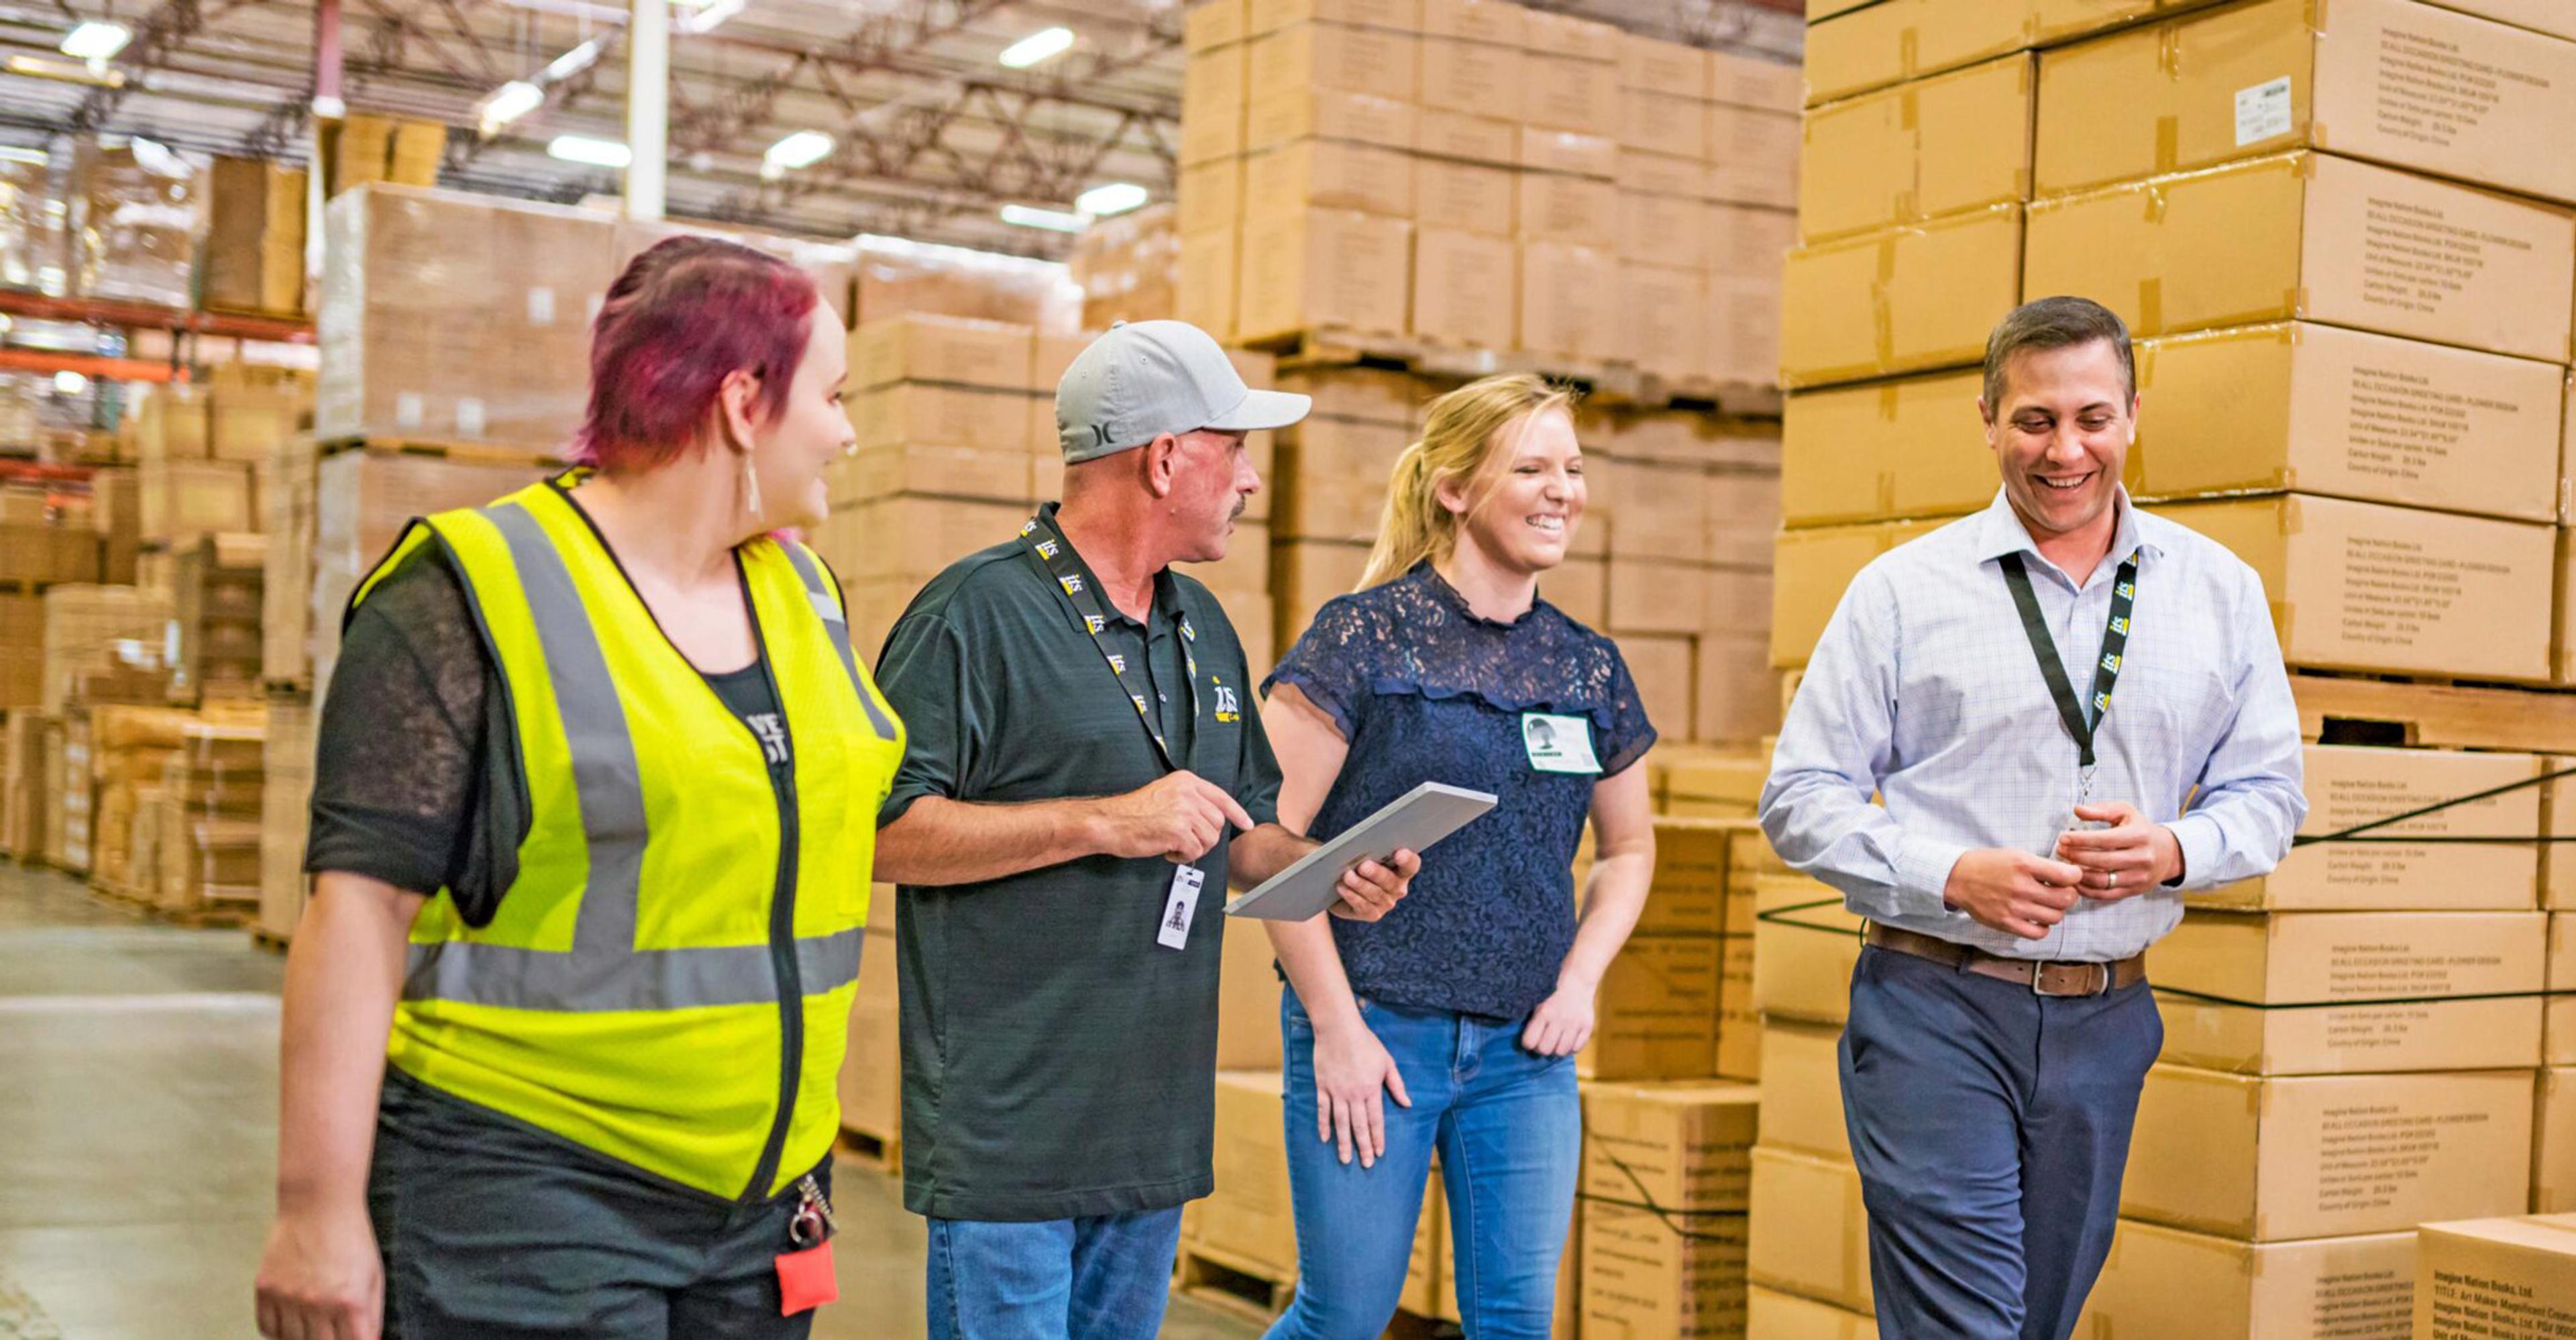 A group of ITS team members walking through a warehouse